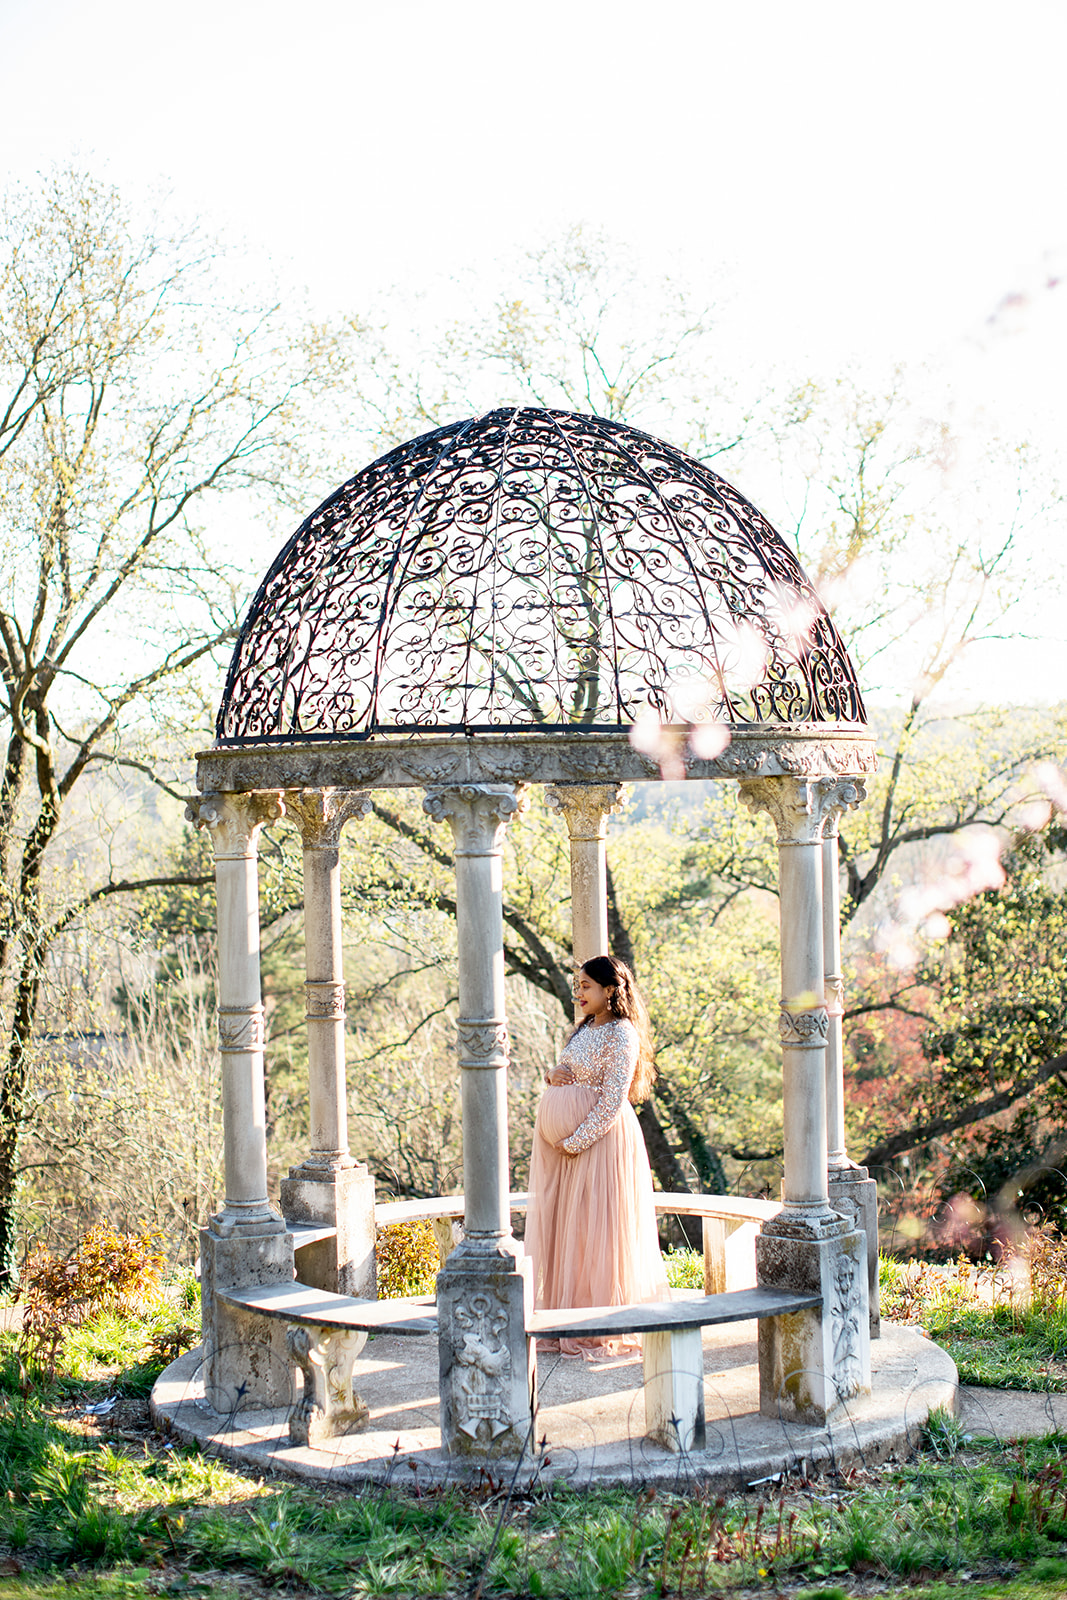 Spring Maternity Photos at Maymont - Image Property of www.j-dphoto.com